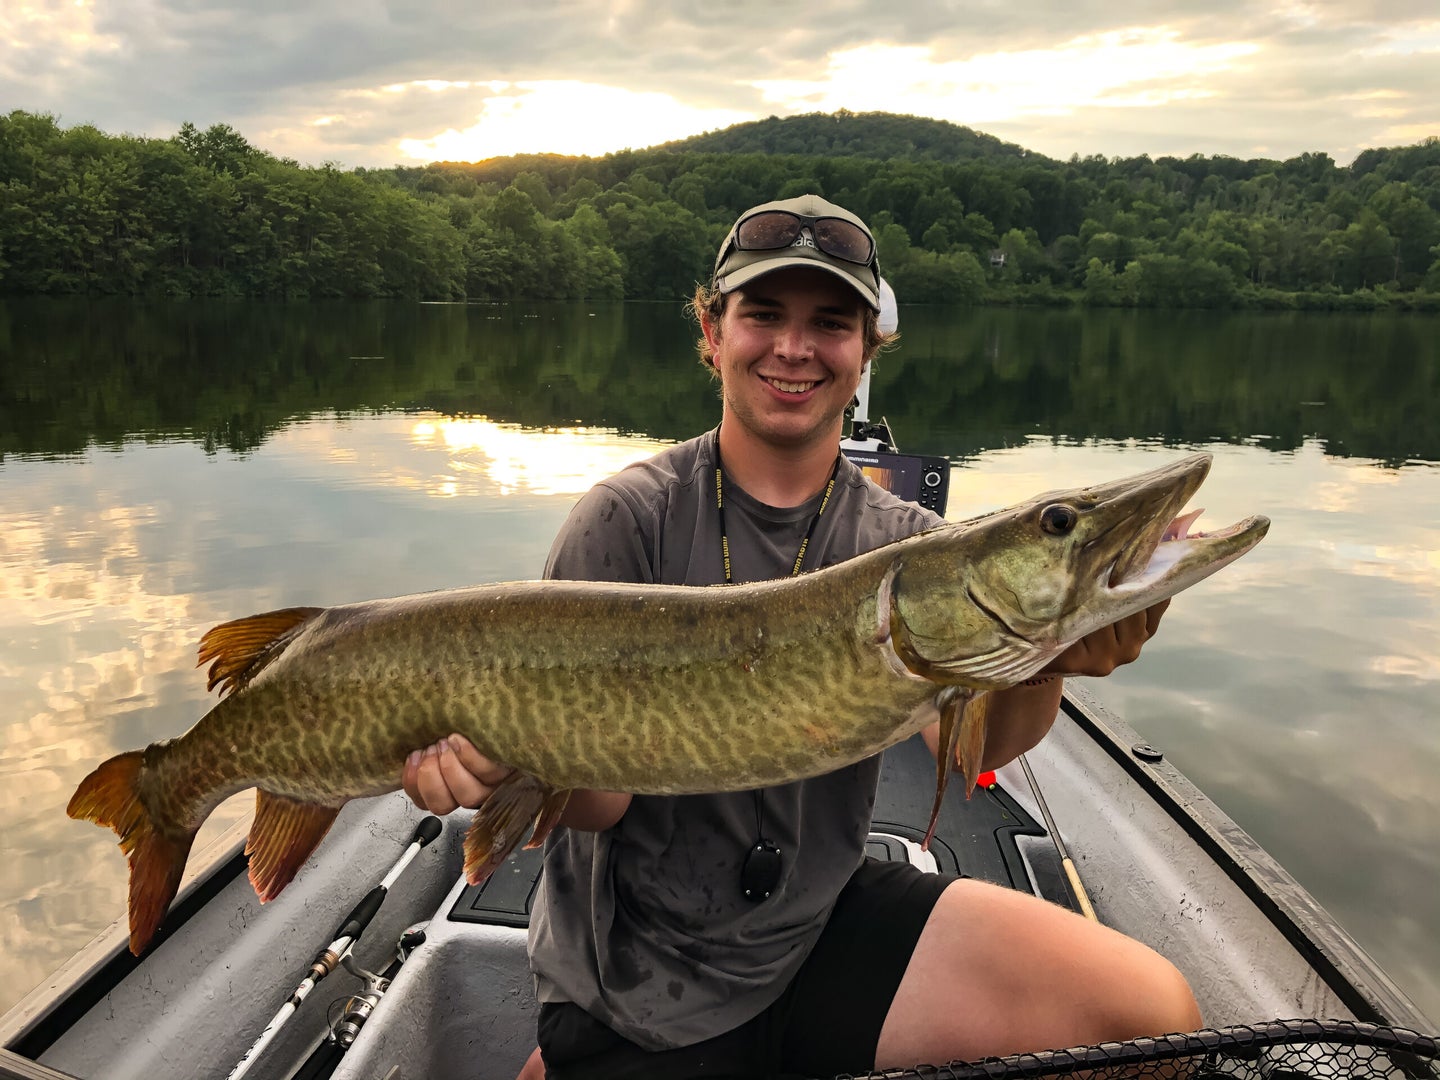 The author with a 40-inch Musky